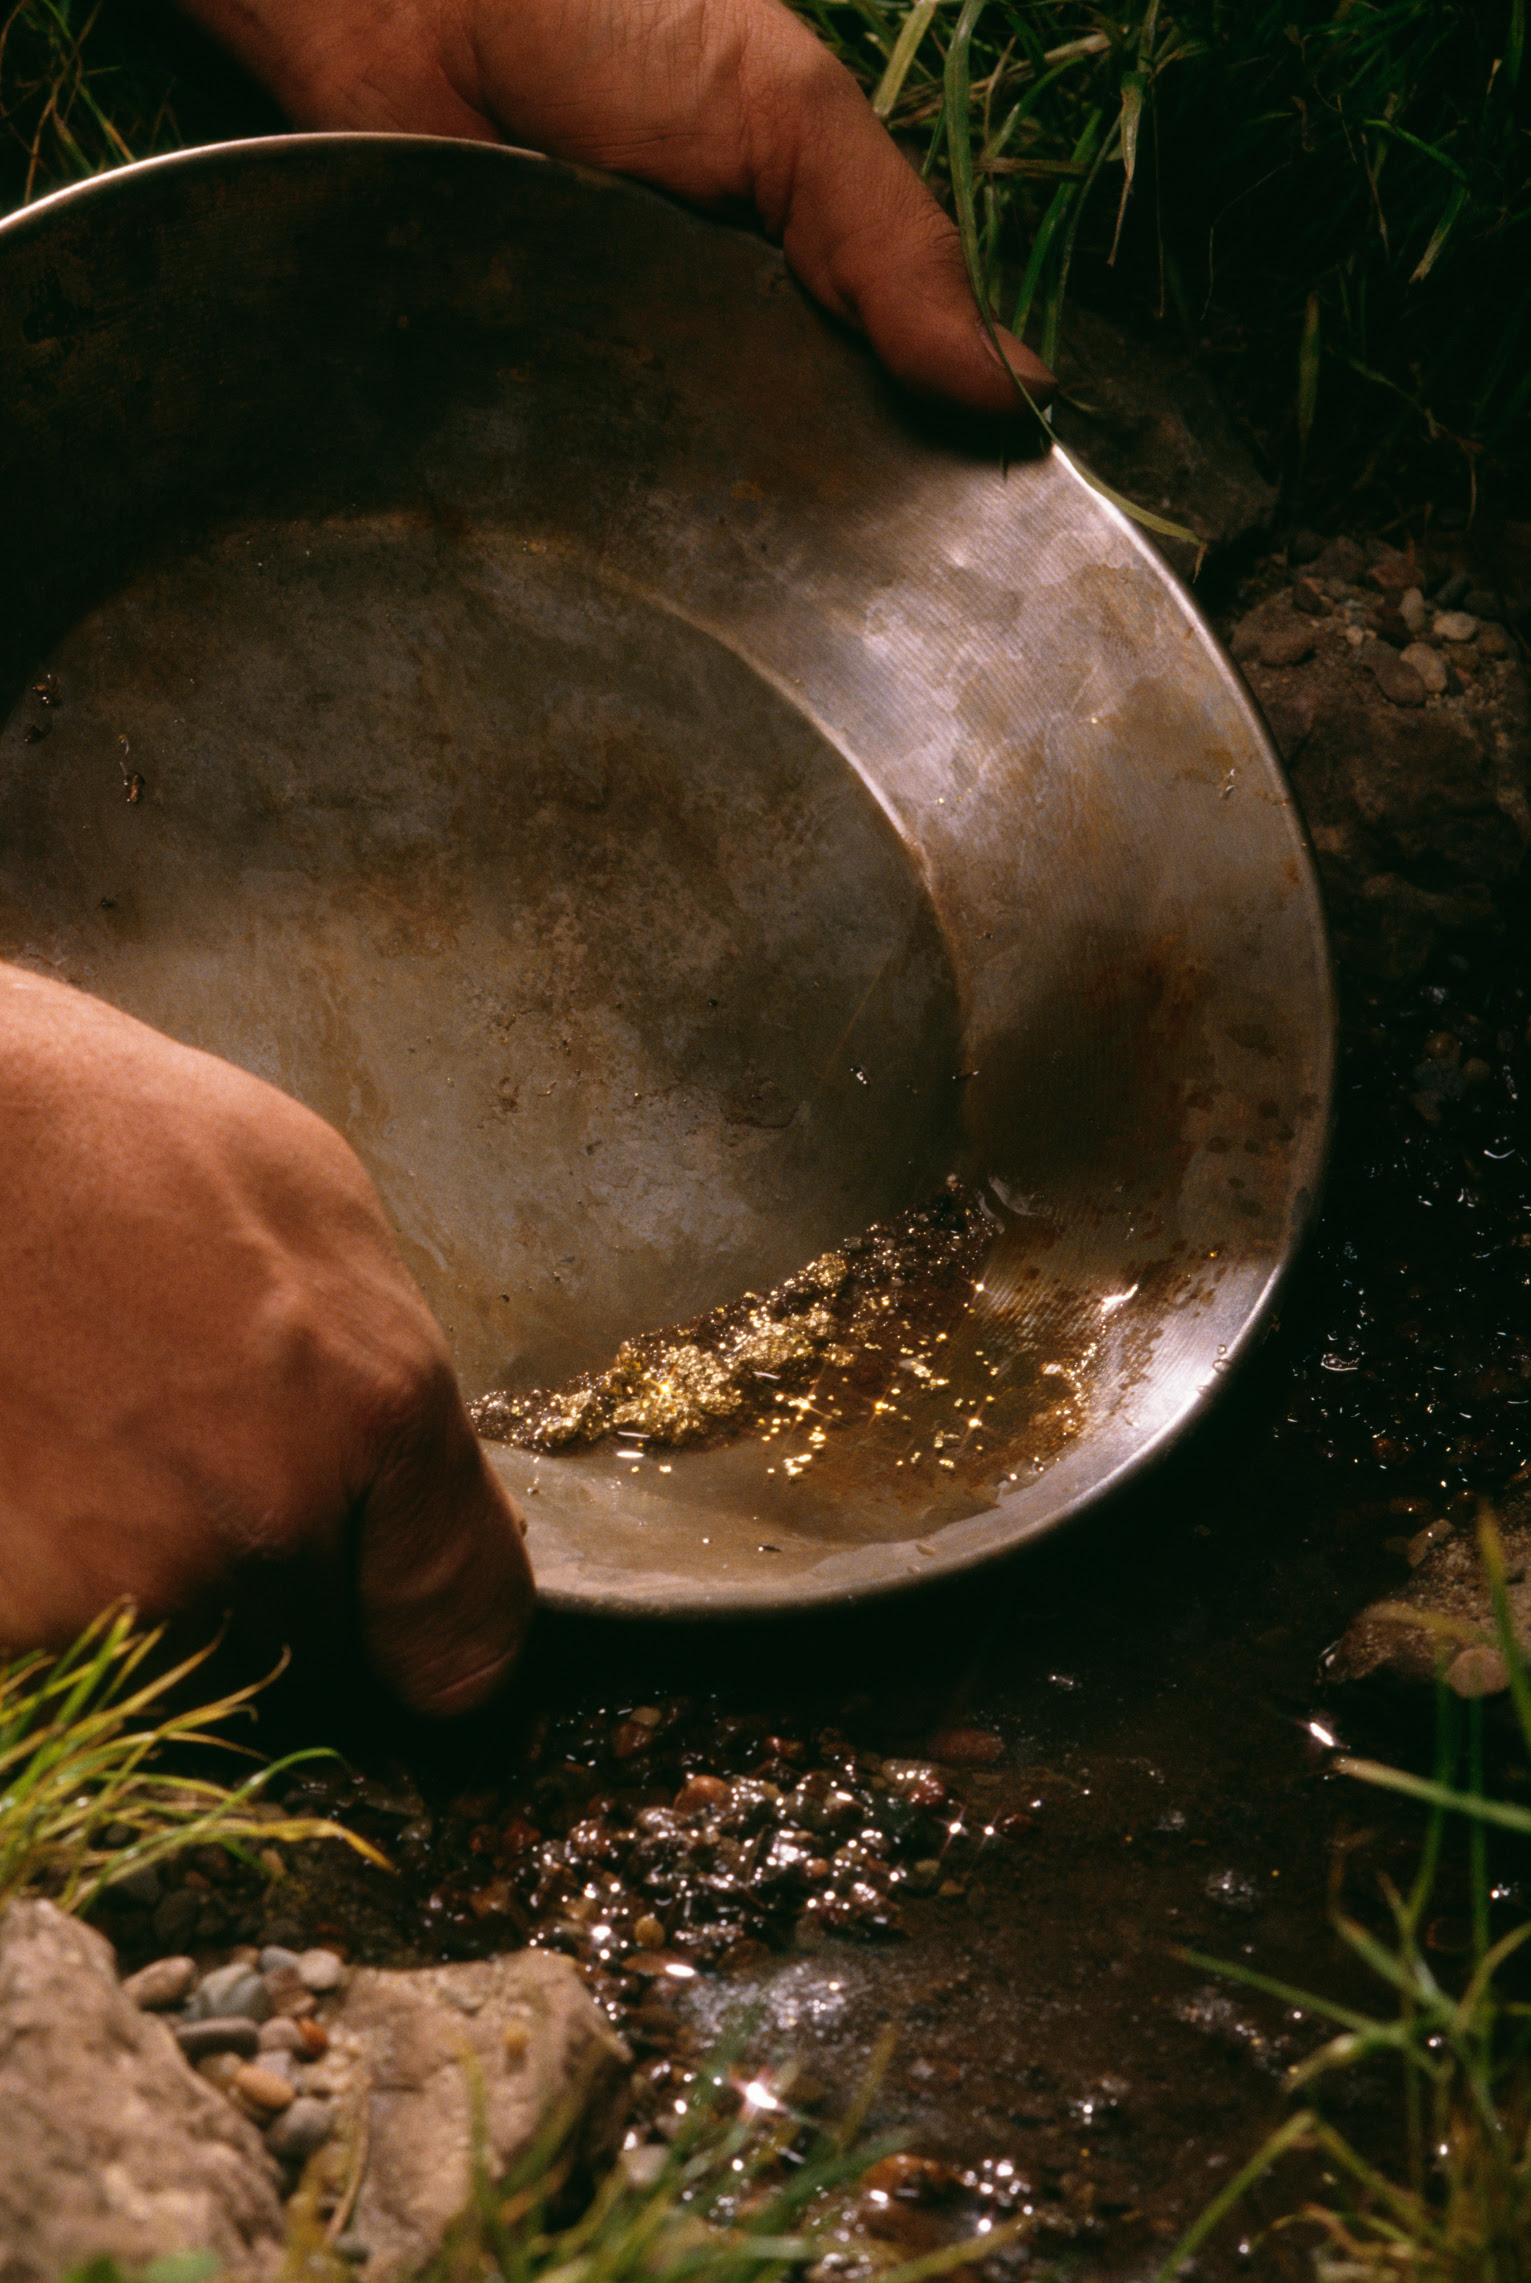 How To Pan For Gold In Your Backyard